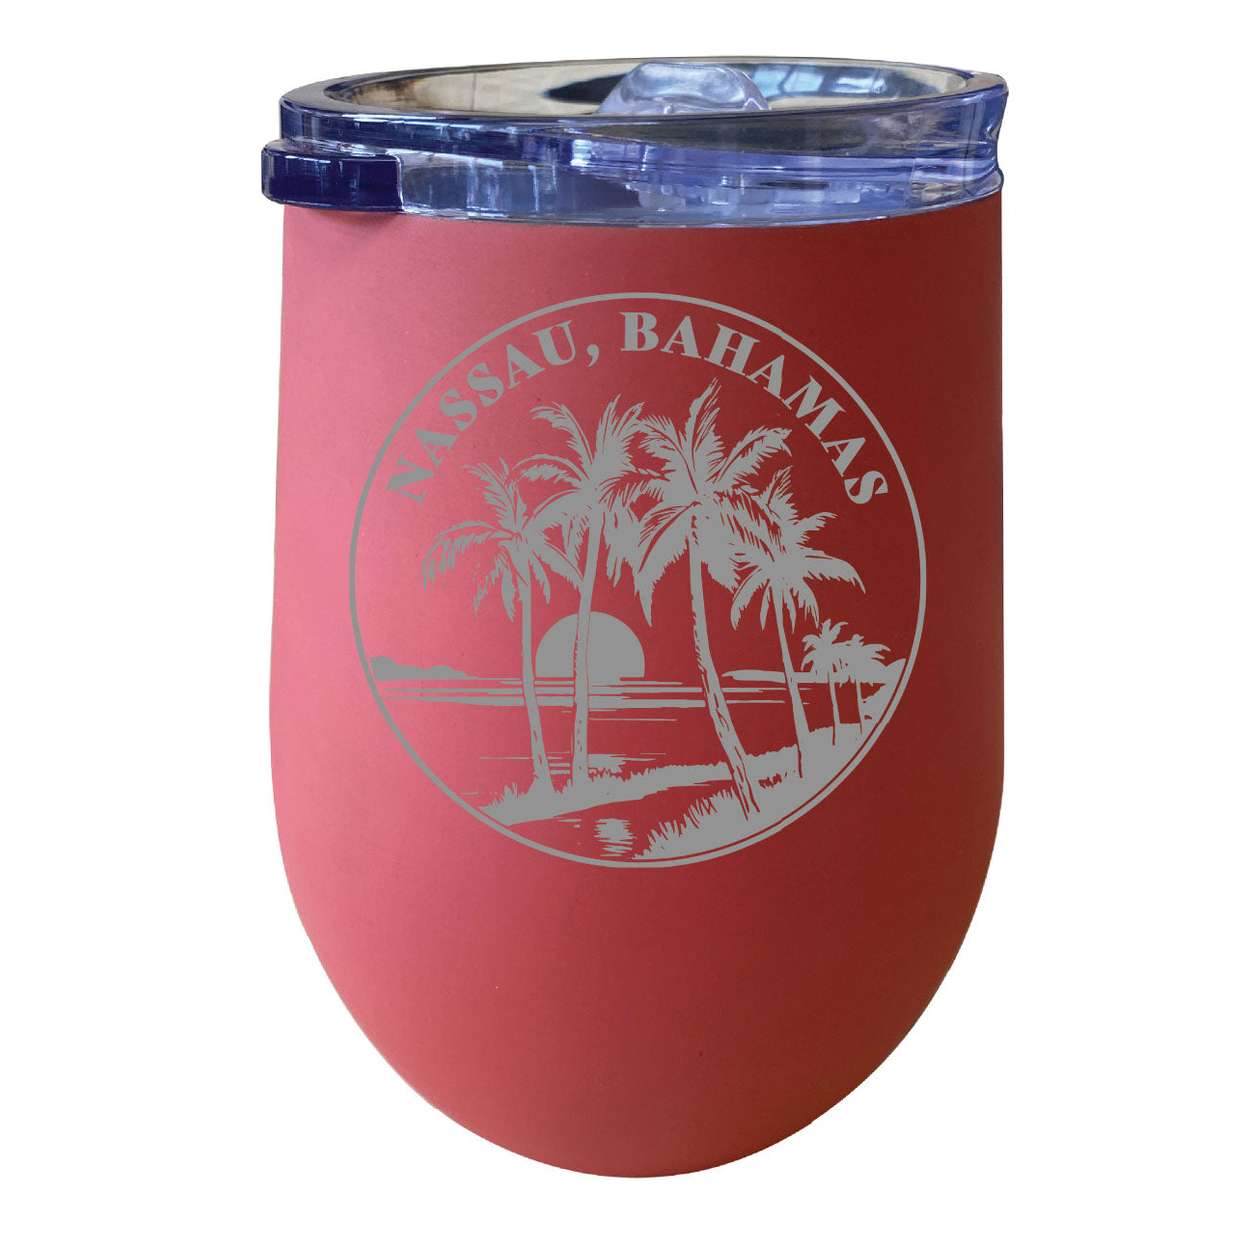 Nassau The Bahamas Souvenir 12 Oz Engraved Insulated Wine Stainless Steel Tumbler - Coral,,2-Pack